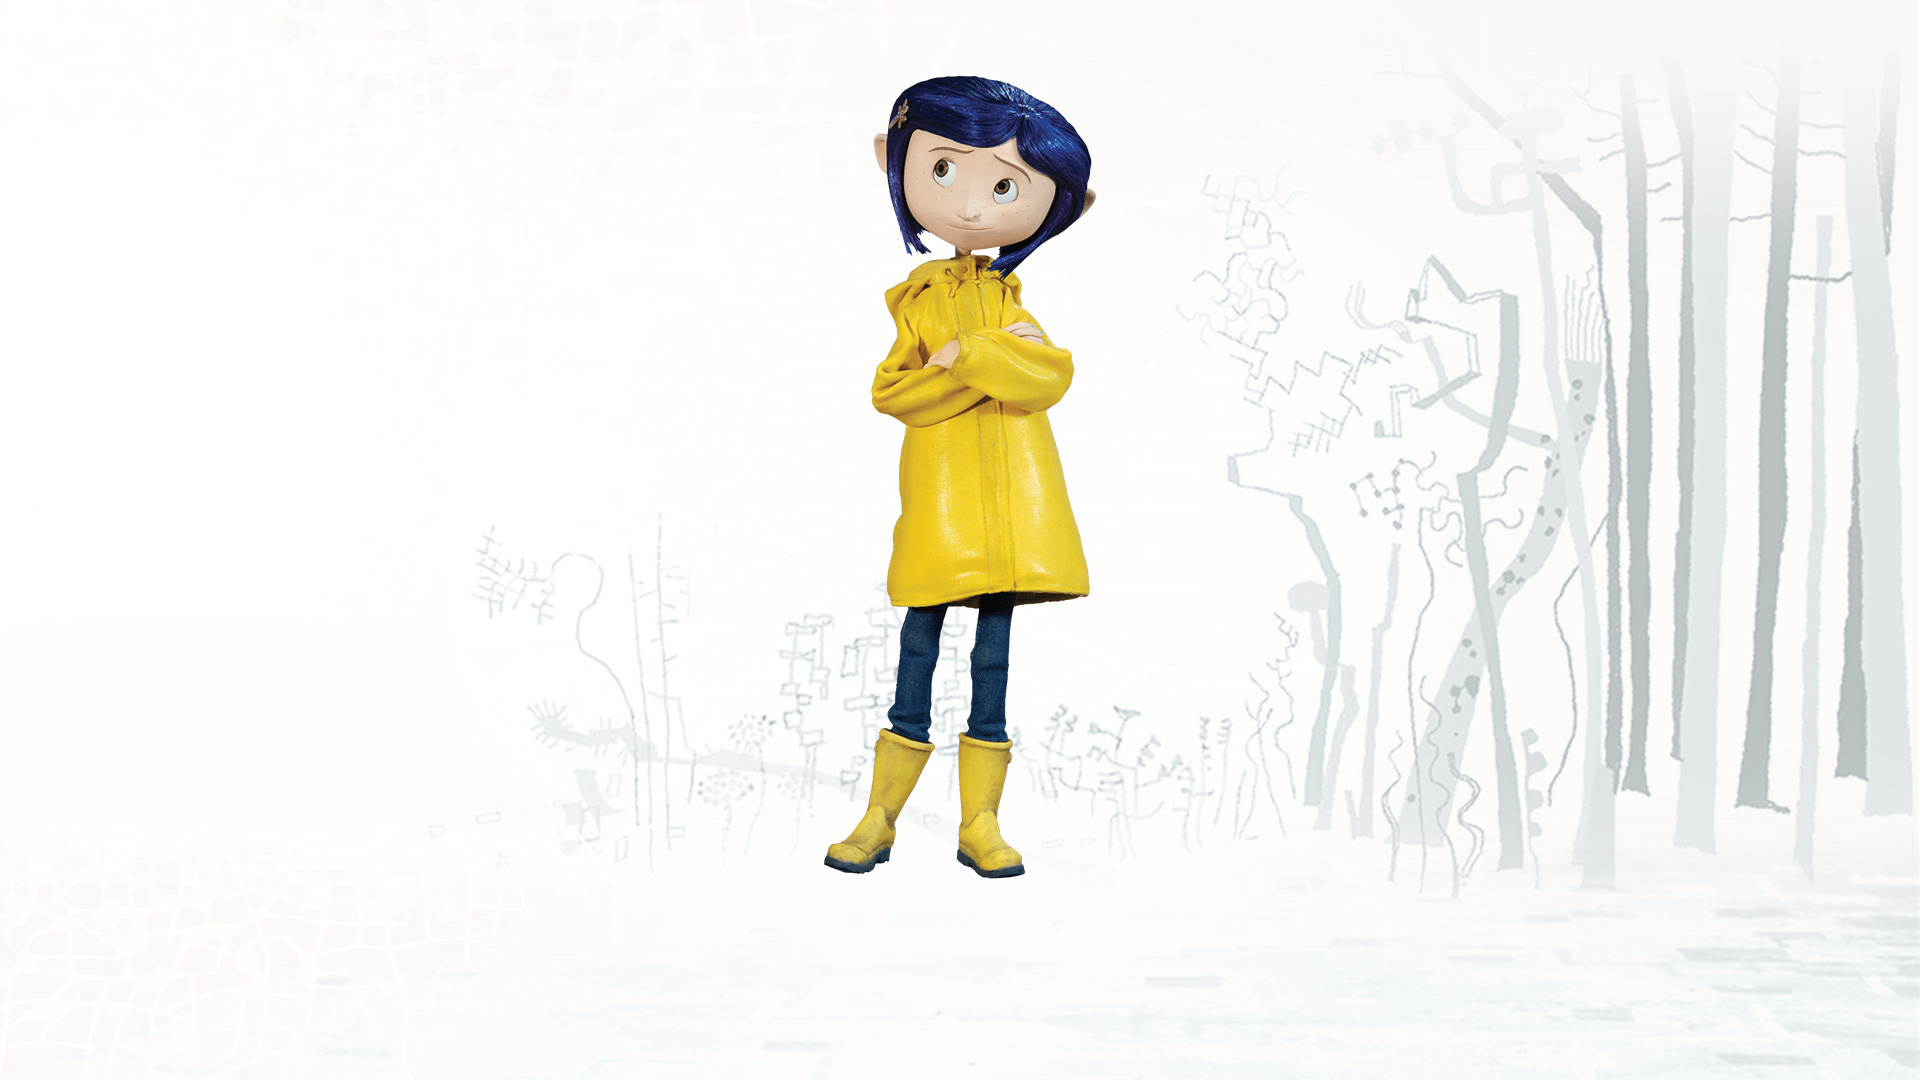 Coraline - Coraline Doll , HD Wallpaper & Backgrounds